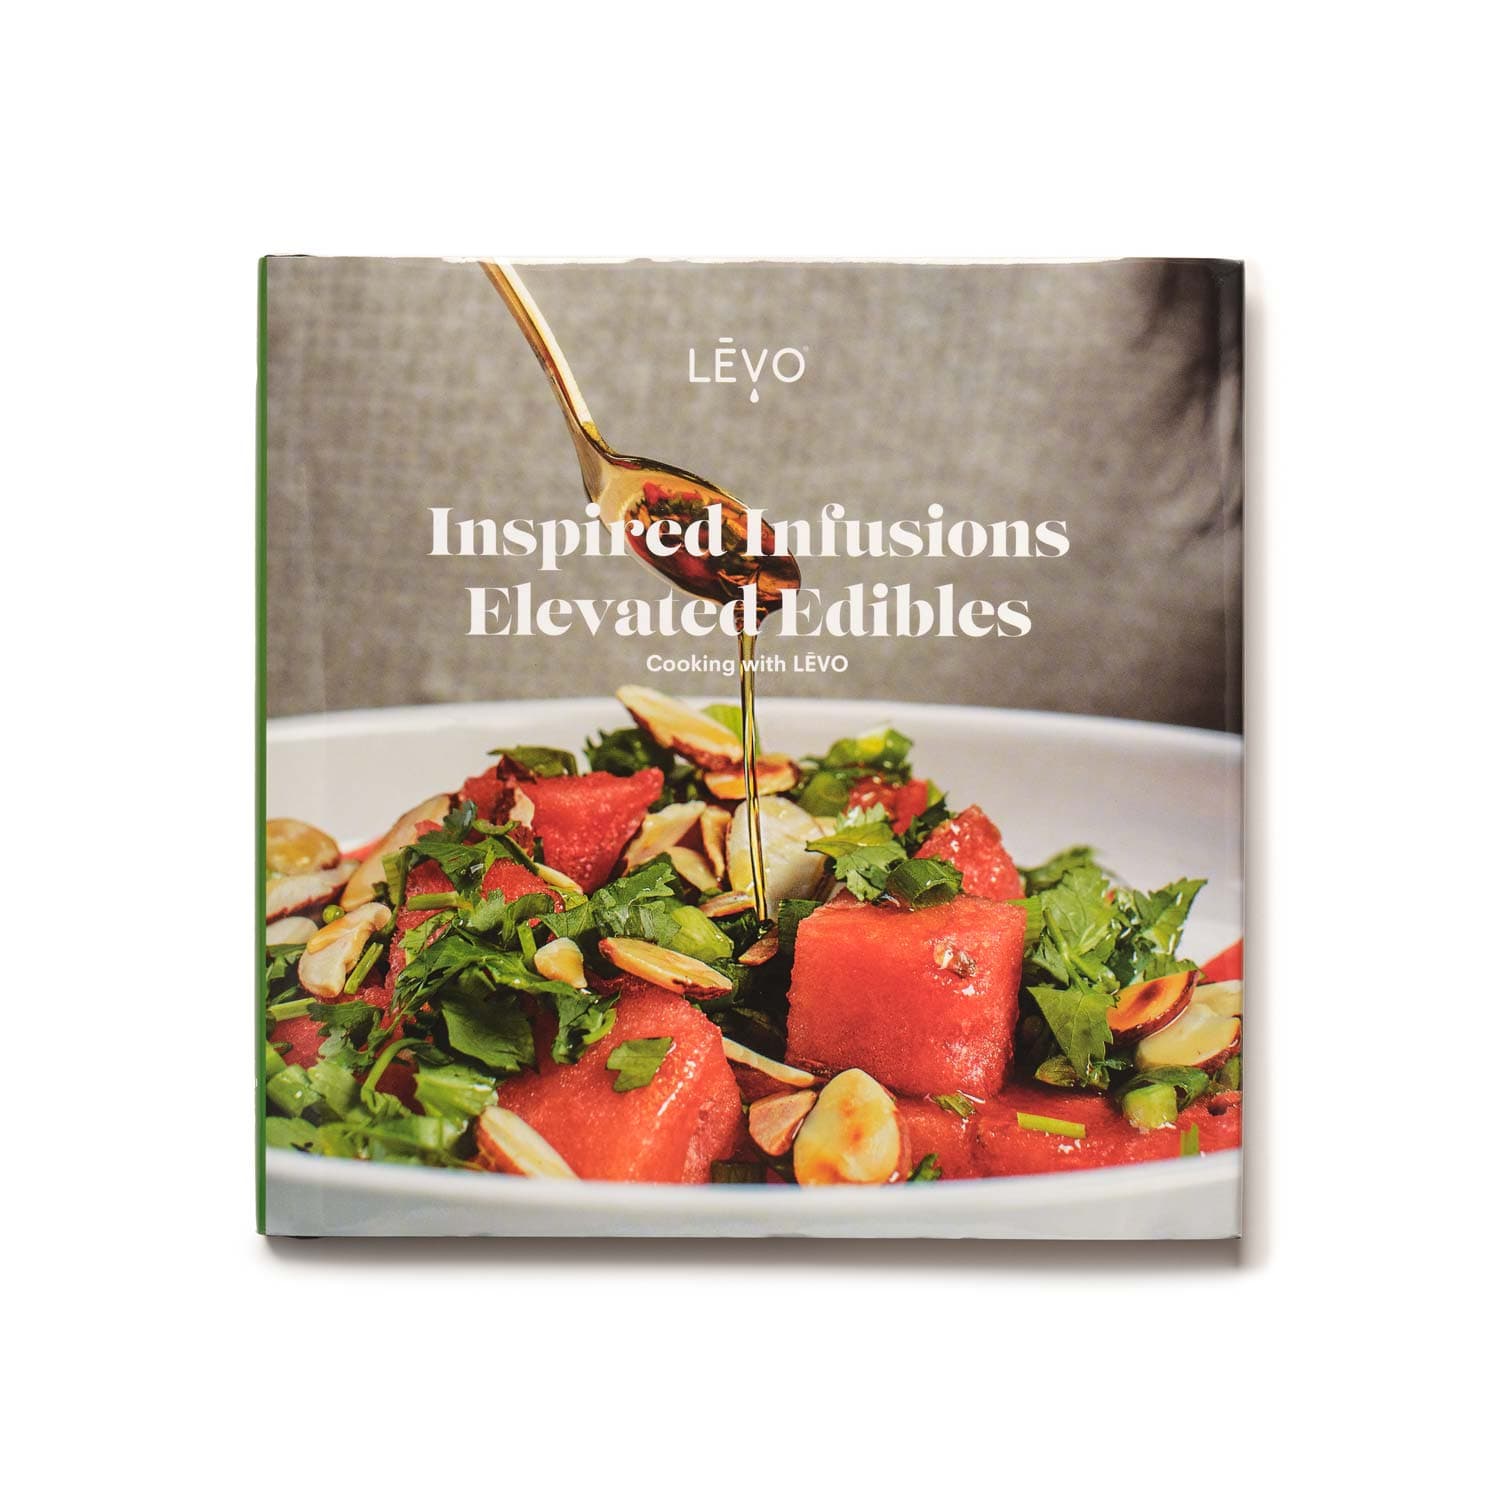 LEVO's premier cookbook: Inspired Infusions, Elevated Edibles. Cooking with LĒVO just better.